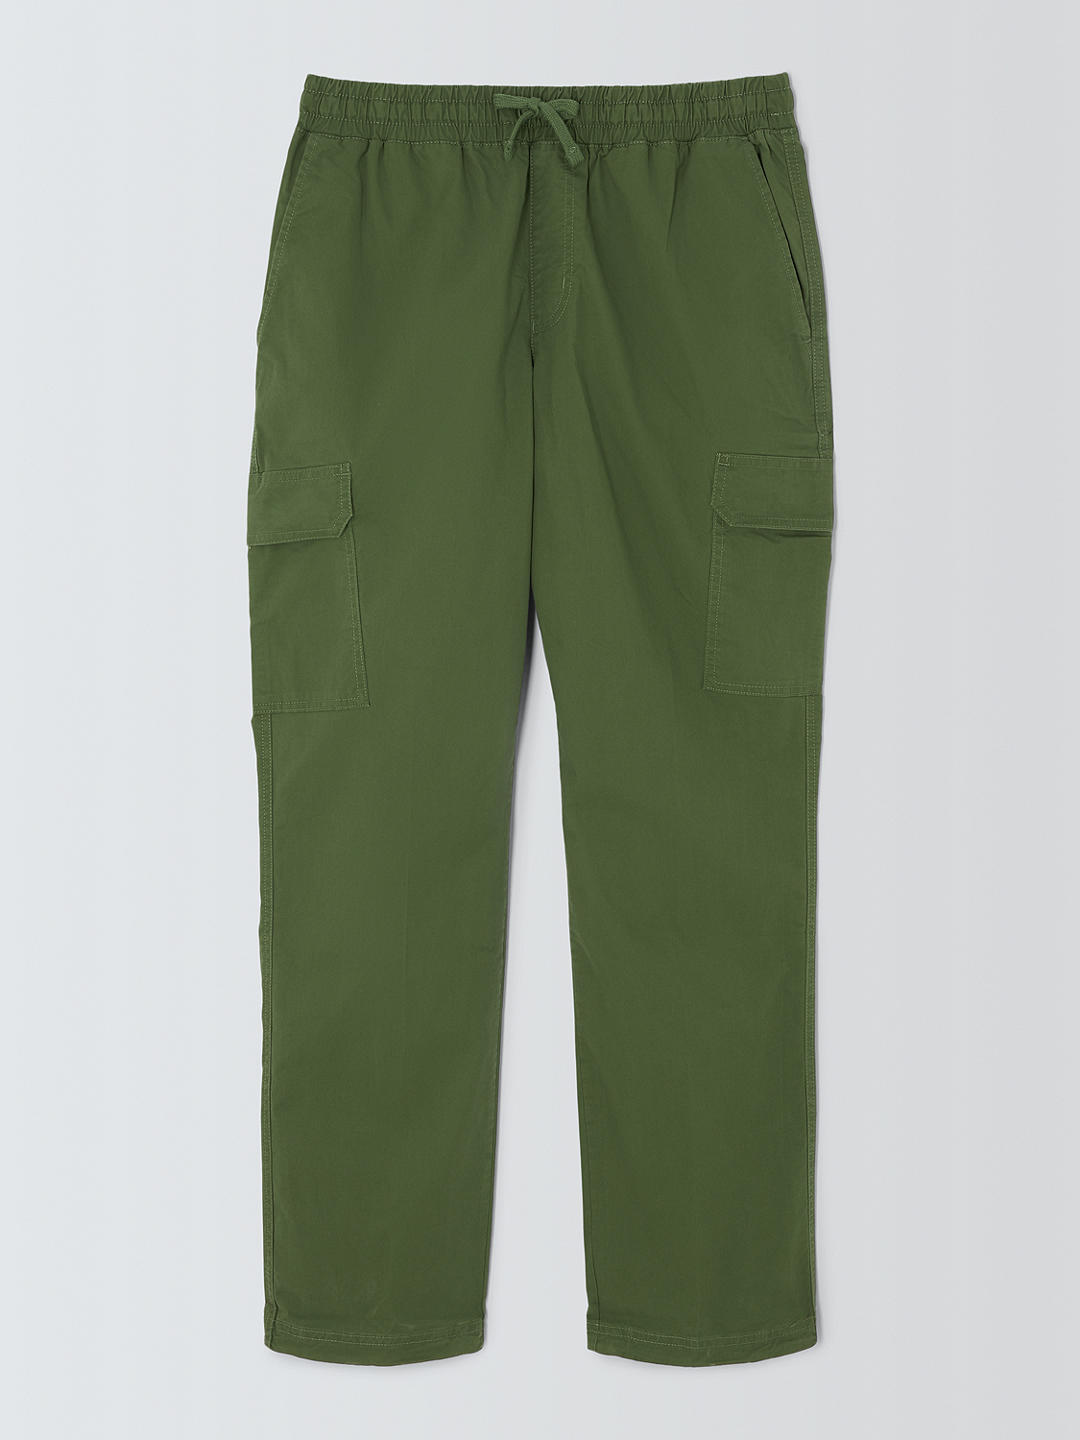 Columbia Rapid River Cargo Trousers, Green